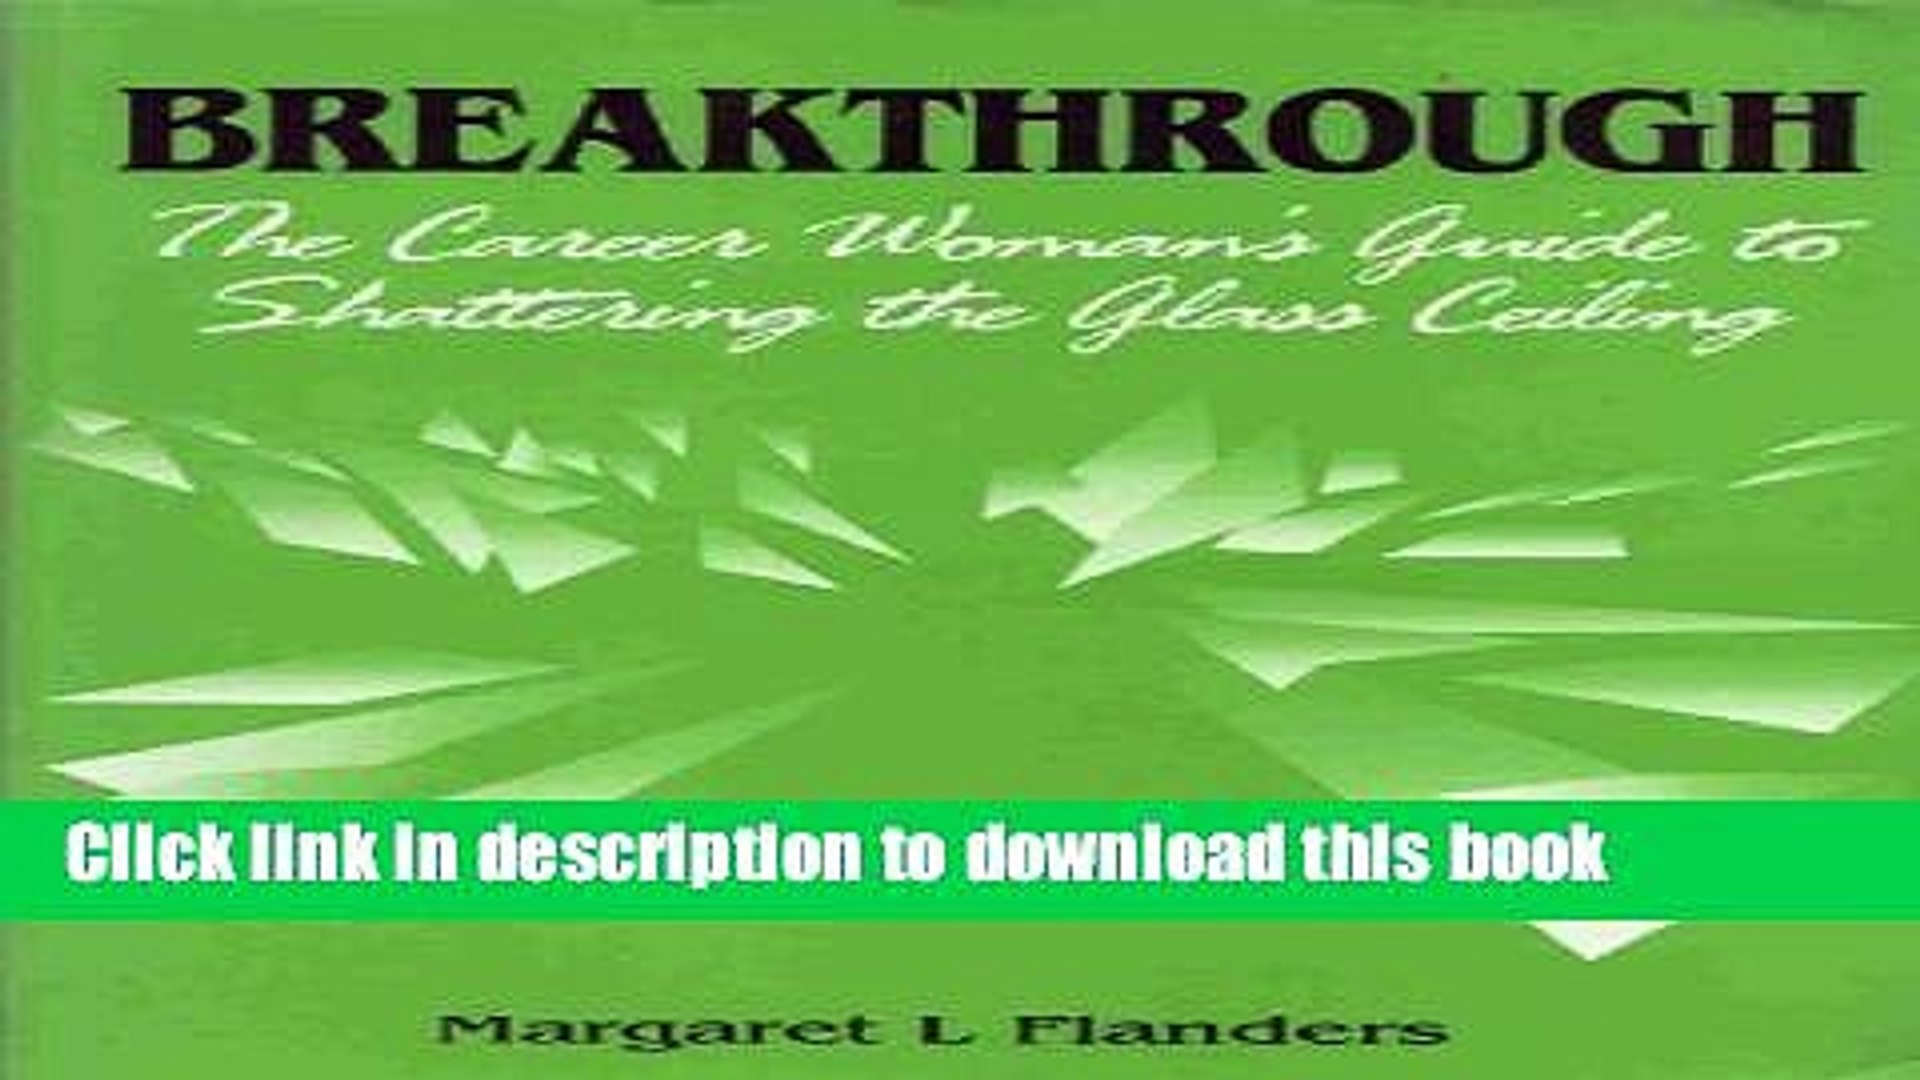 Books Breakthrough The Career Woman S Guide To Shattering The